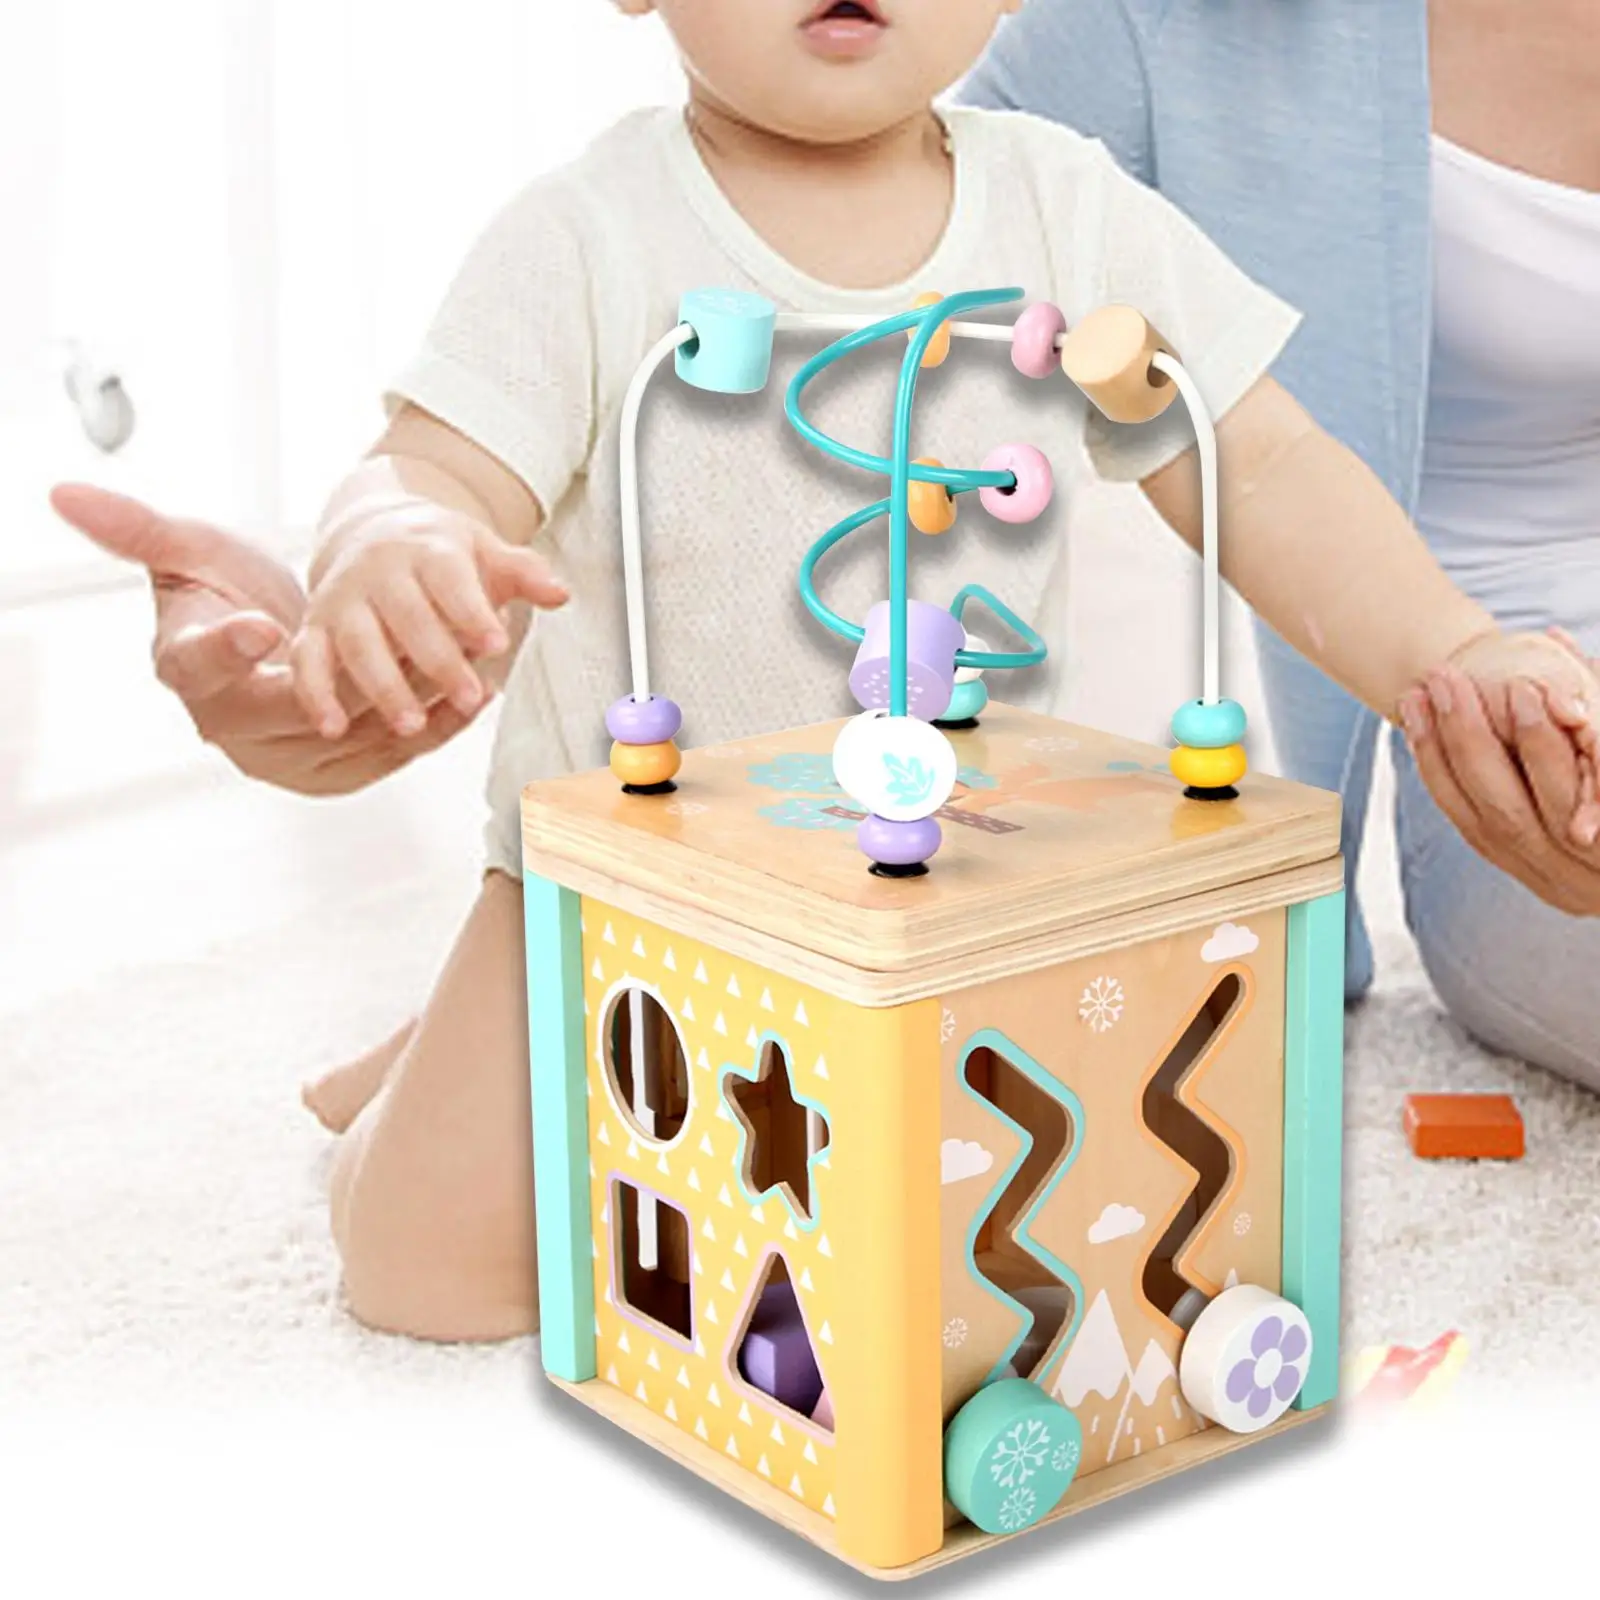 Bead Maze with Bead Maze Interactive Toy Early Education for Preschool Kids